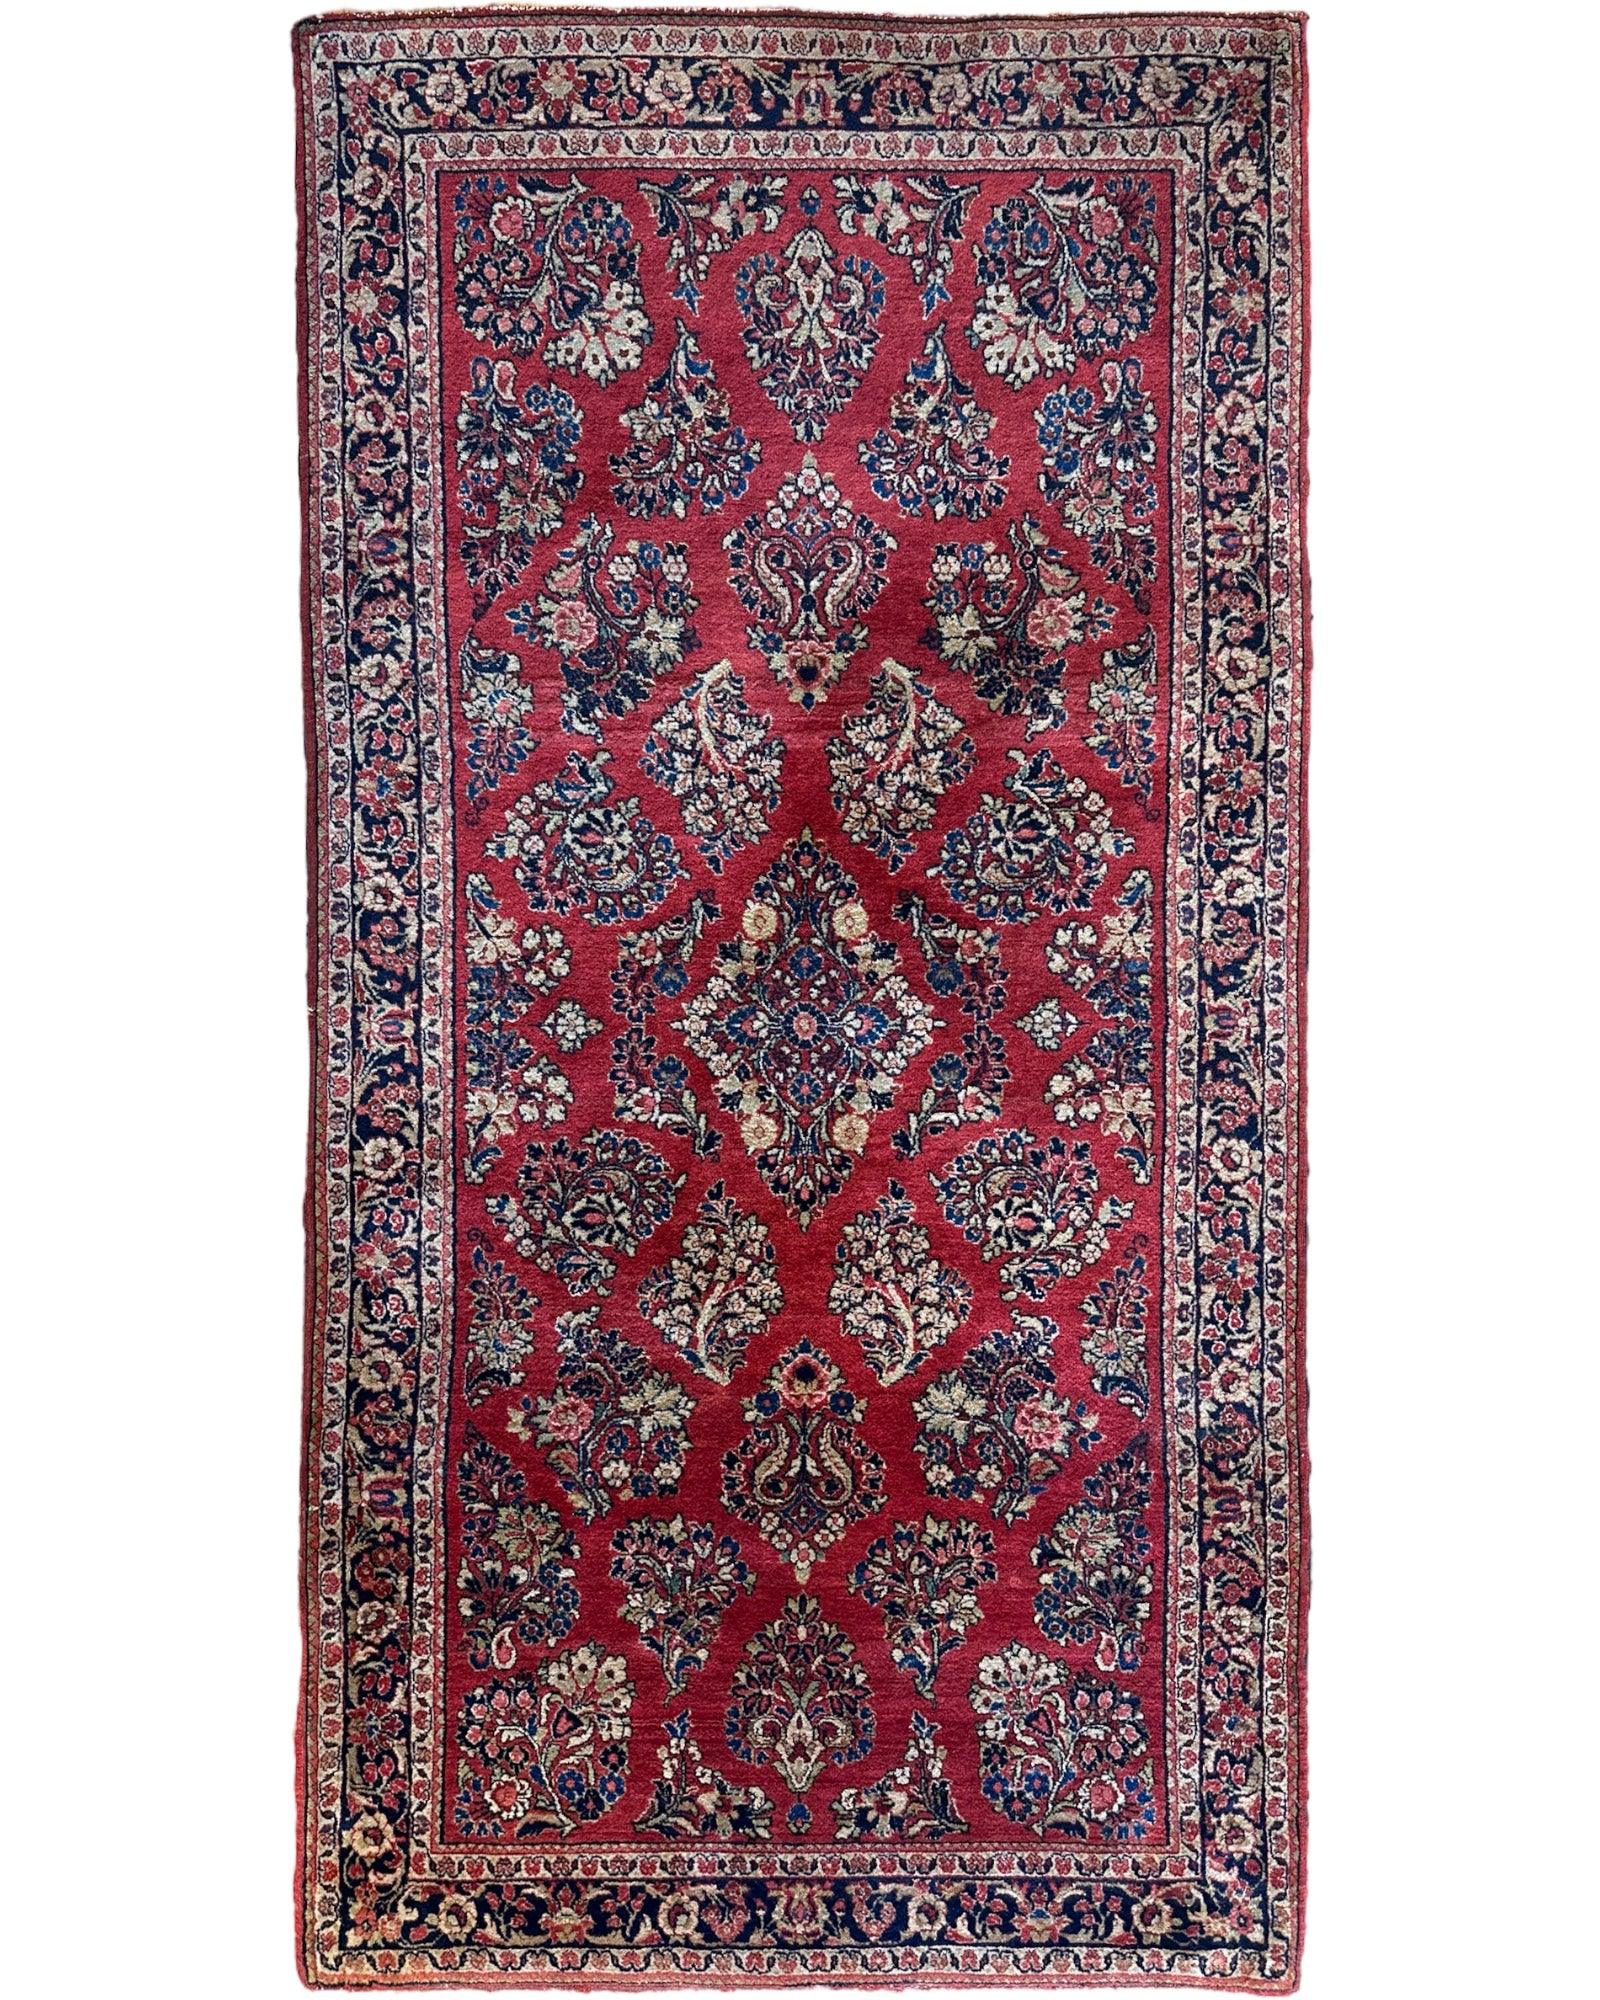 Antique Hand-Knotted Persian Sarouk Runner Rug 3’4 x 6’5